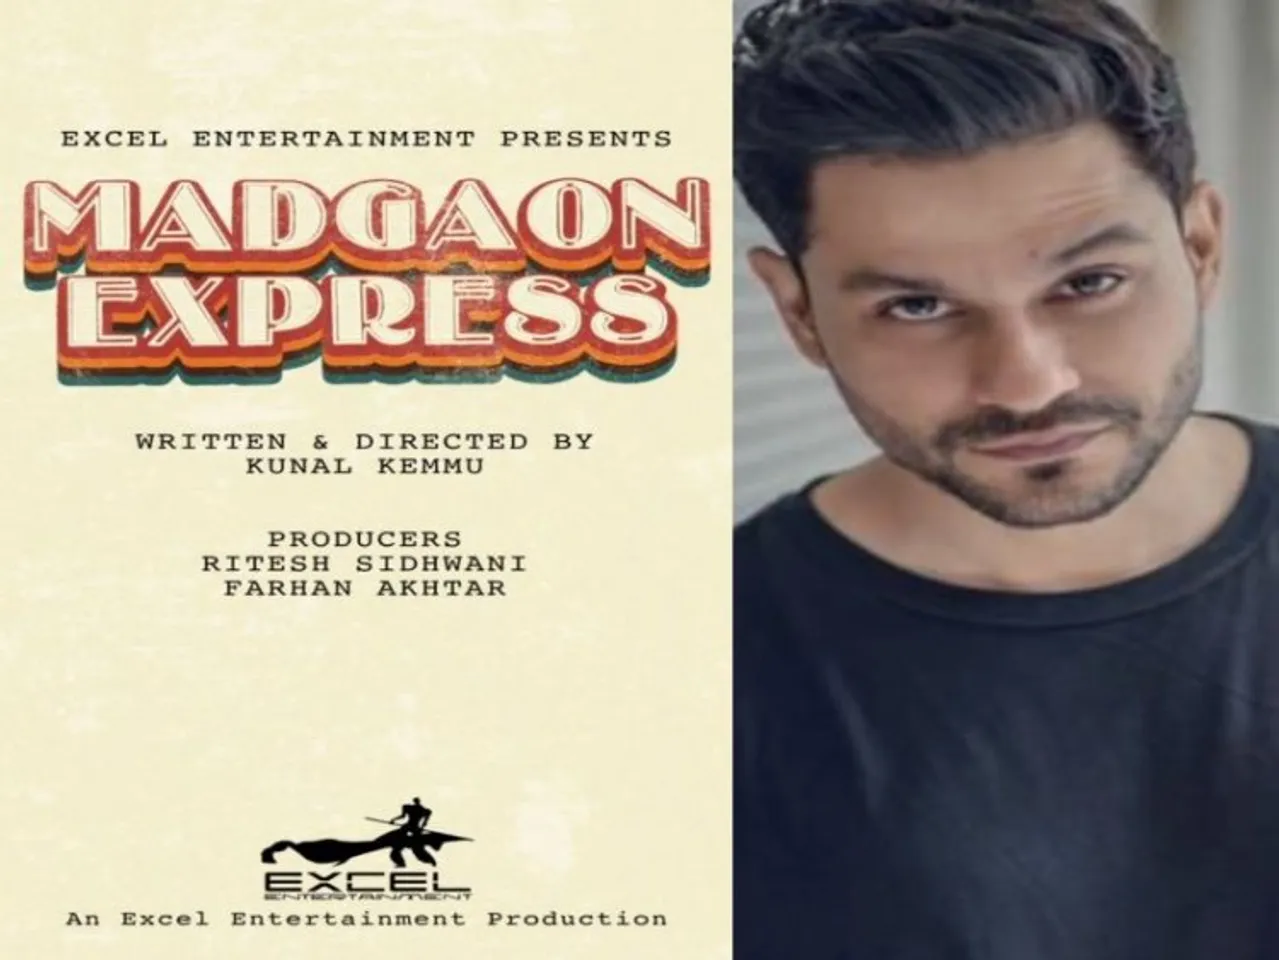 Kuenal Kemmu shared about his directional debut Madgaon Express on twitter